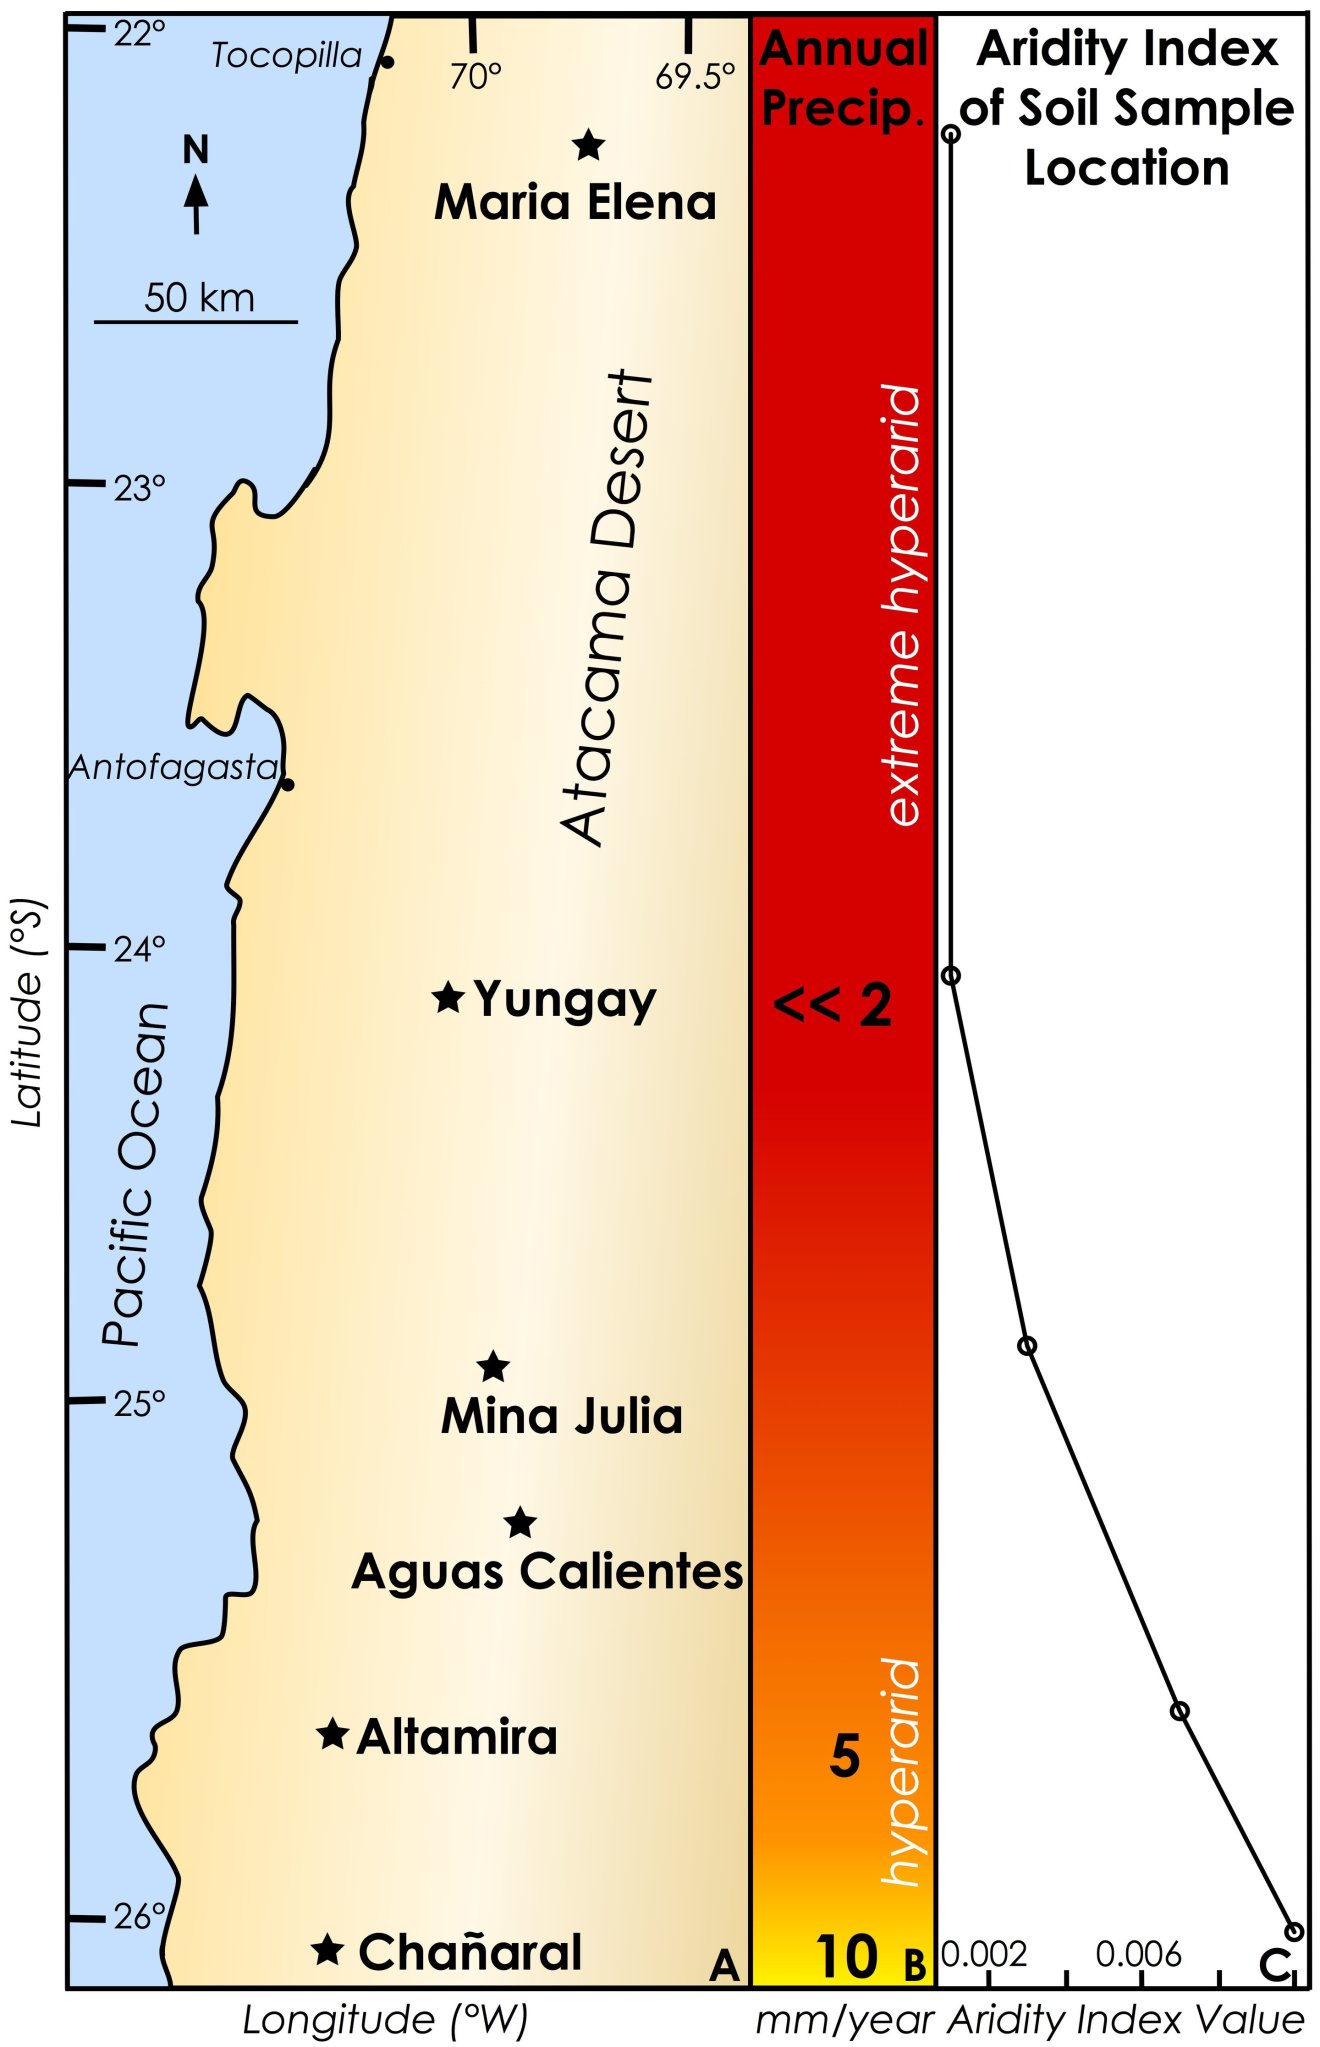 This map of the Atacama Desert shows the change in annual precipitation from one end of the desert to the other. The aridity index mentioned is a value based on annual rainfall and water loss.